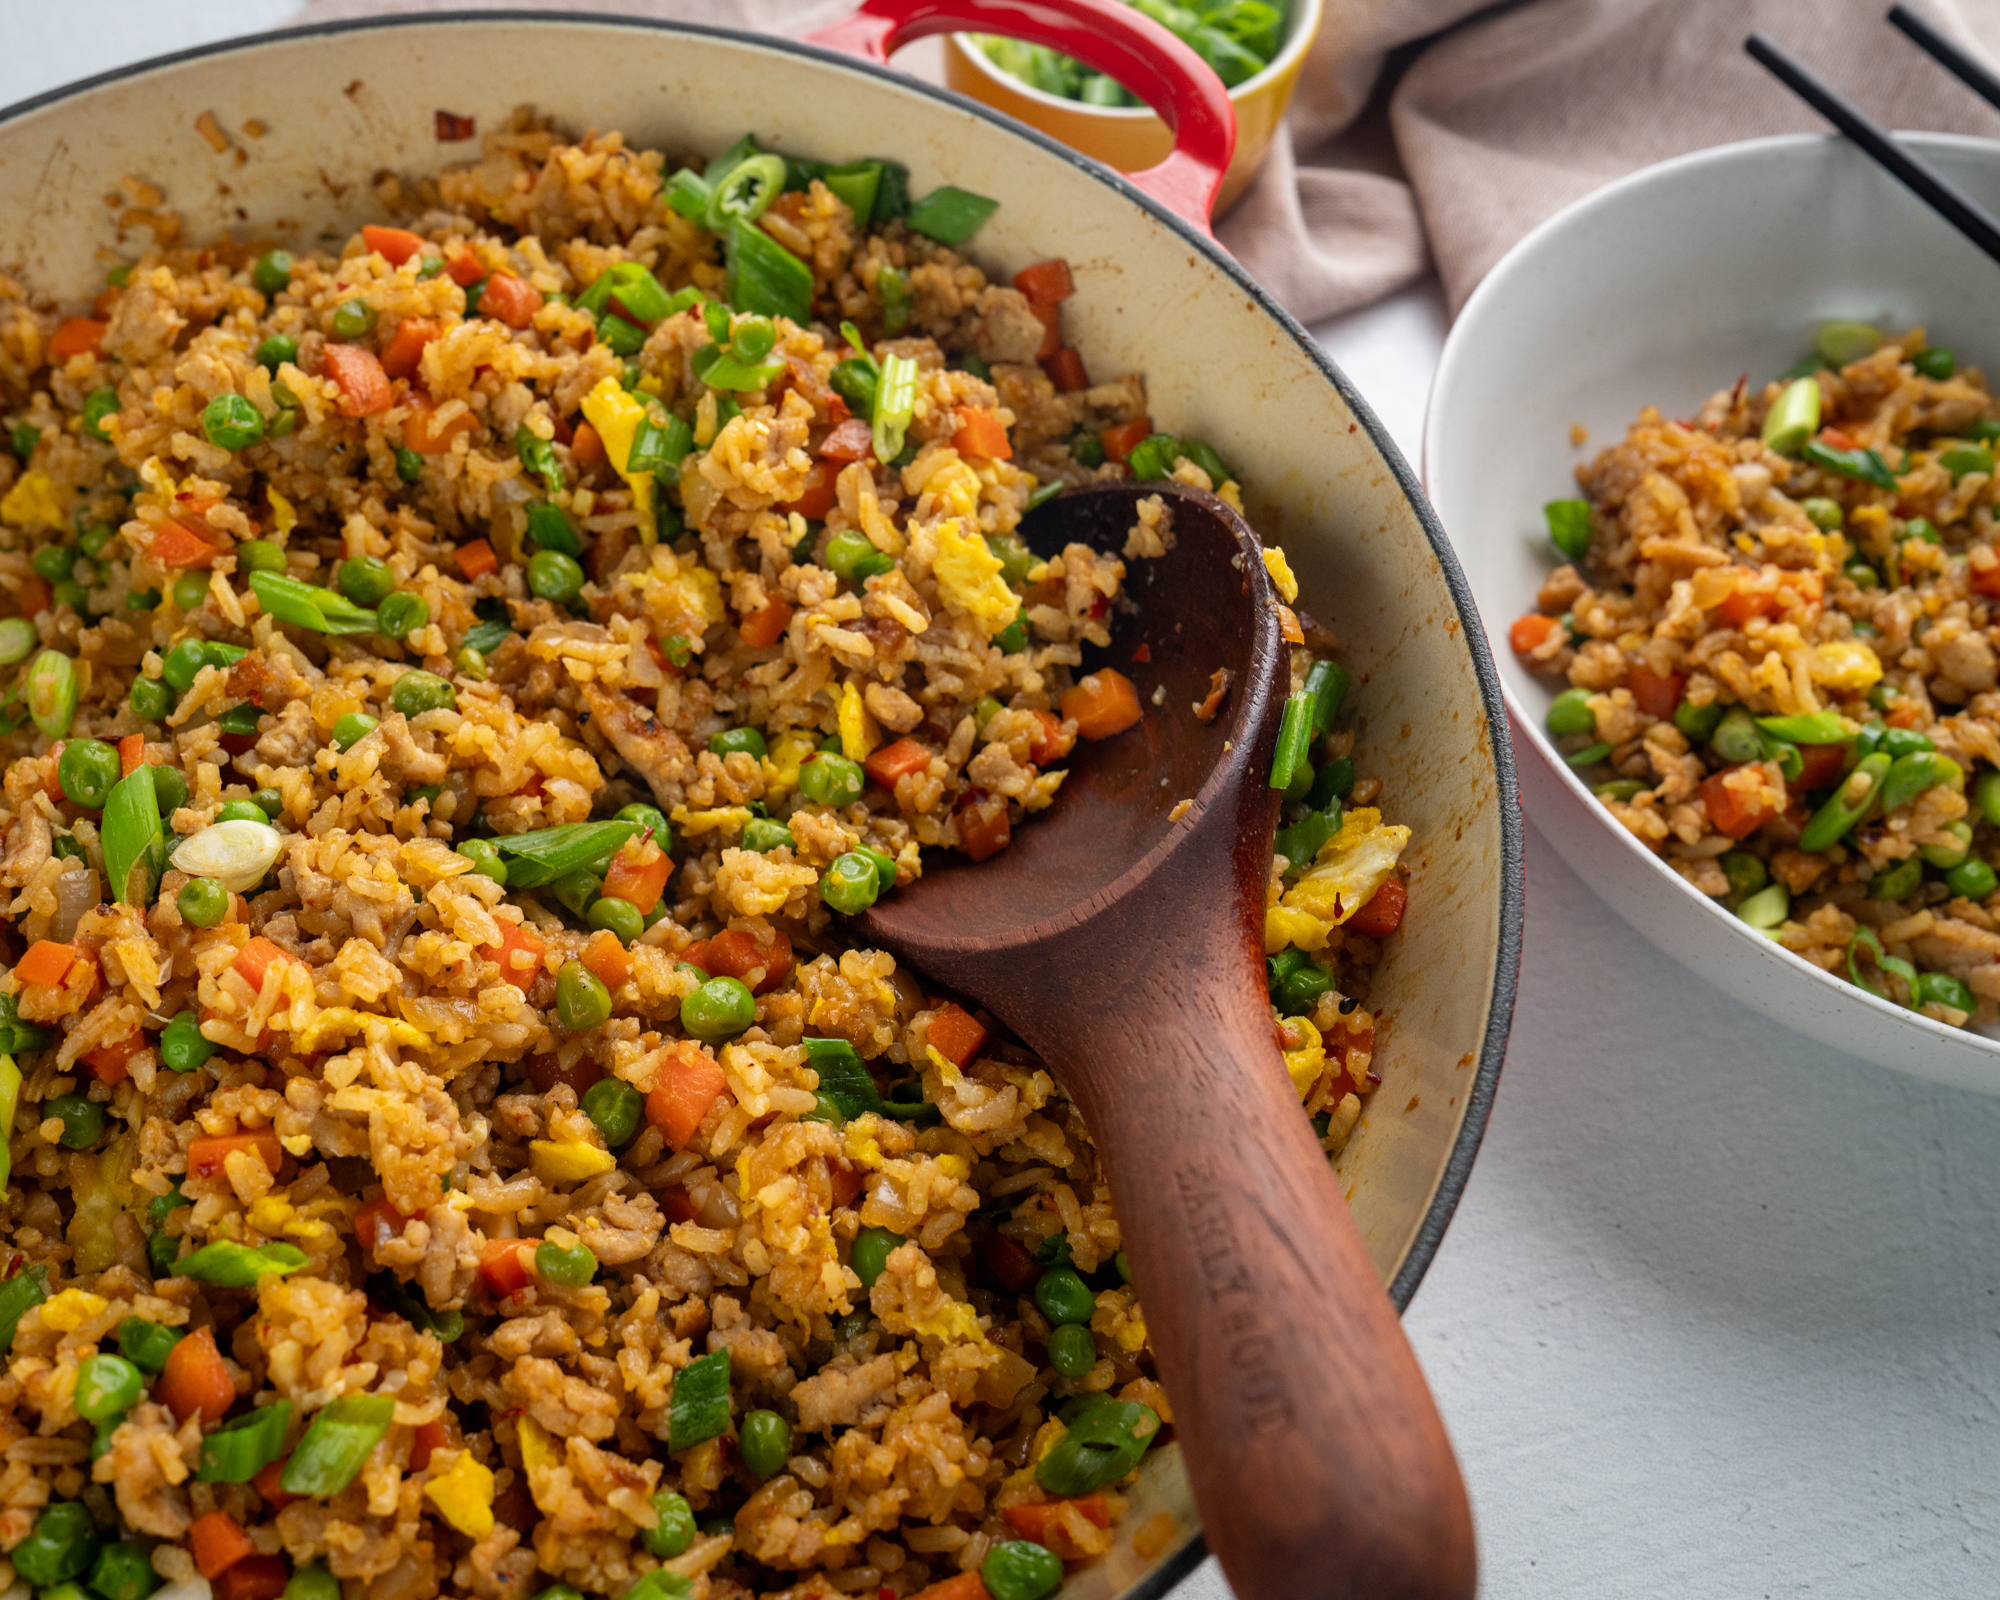 Fried rice with carrots, pease and chicken